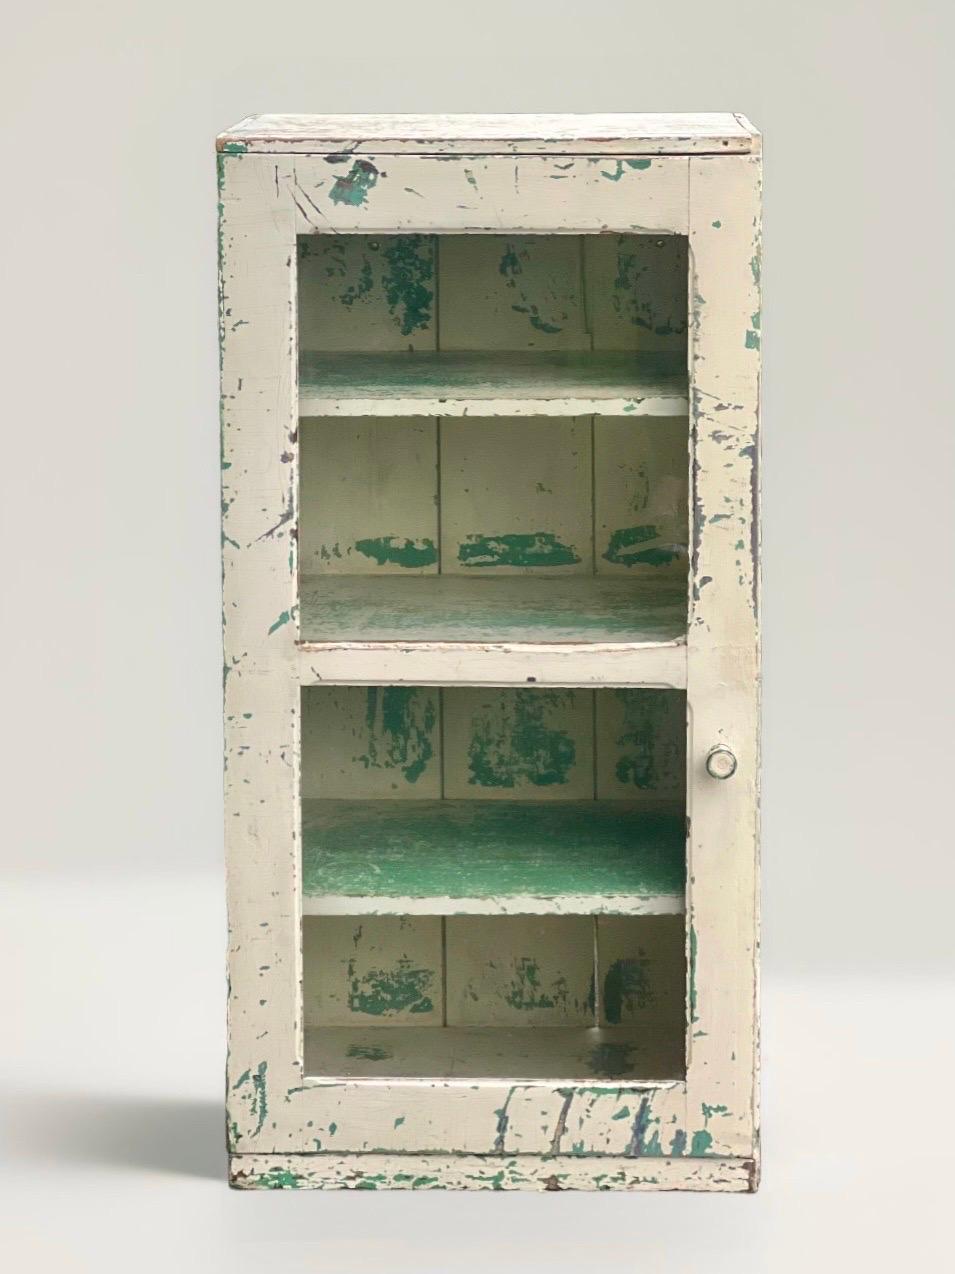 Super versatile rustic patinated single door cabinet with glass front, c. 1880-1900.

This great cabinet/cupboard has the patina of time with layers of white and green paint with three deep, fixed shelves behind a double-paned glass door. This is a